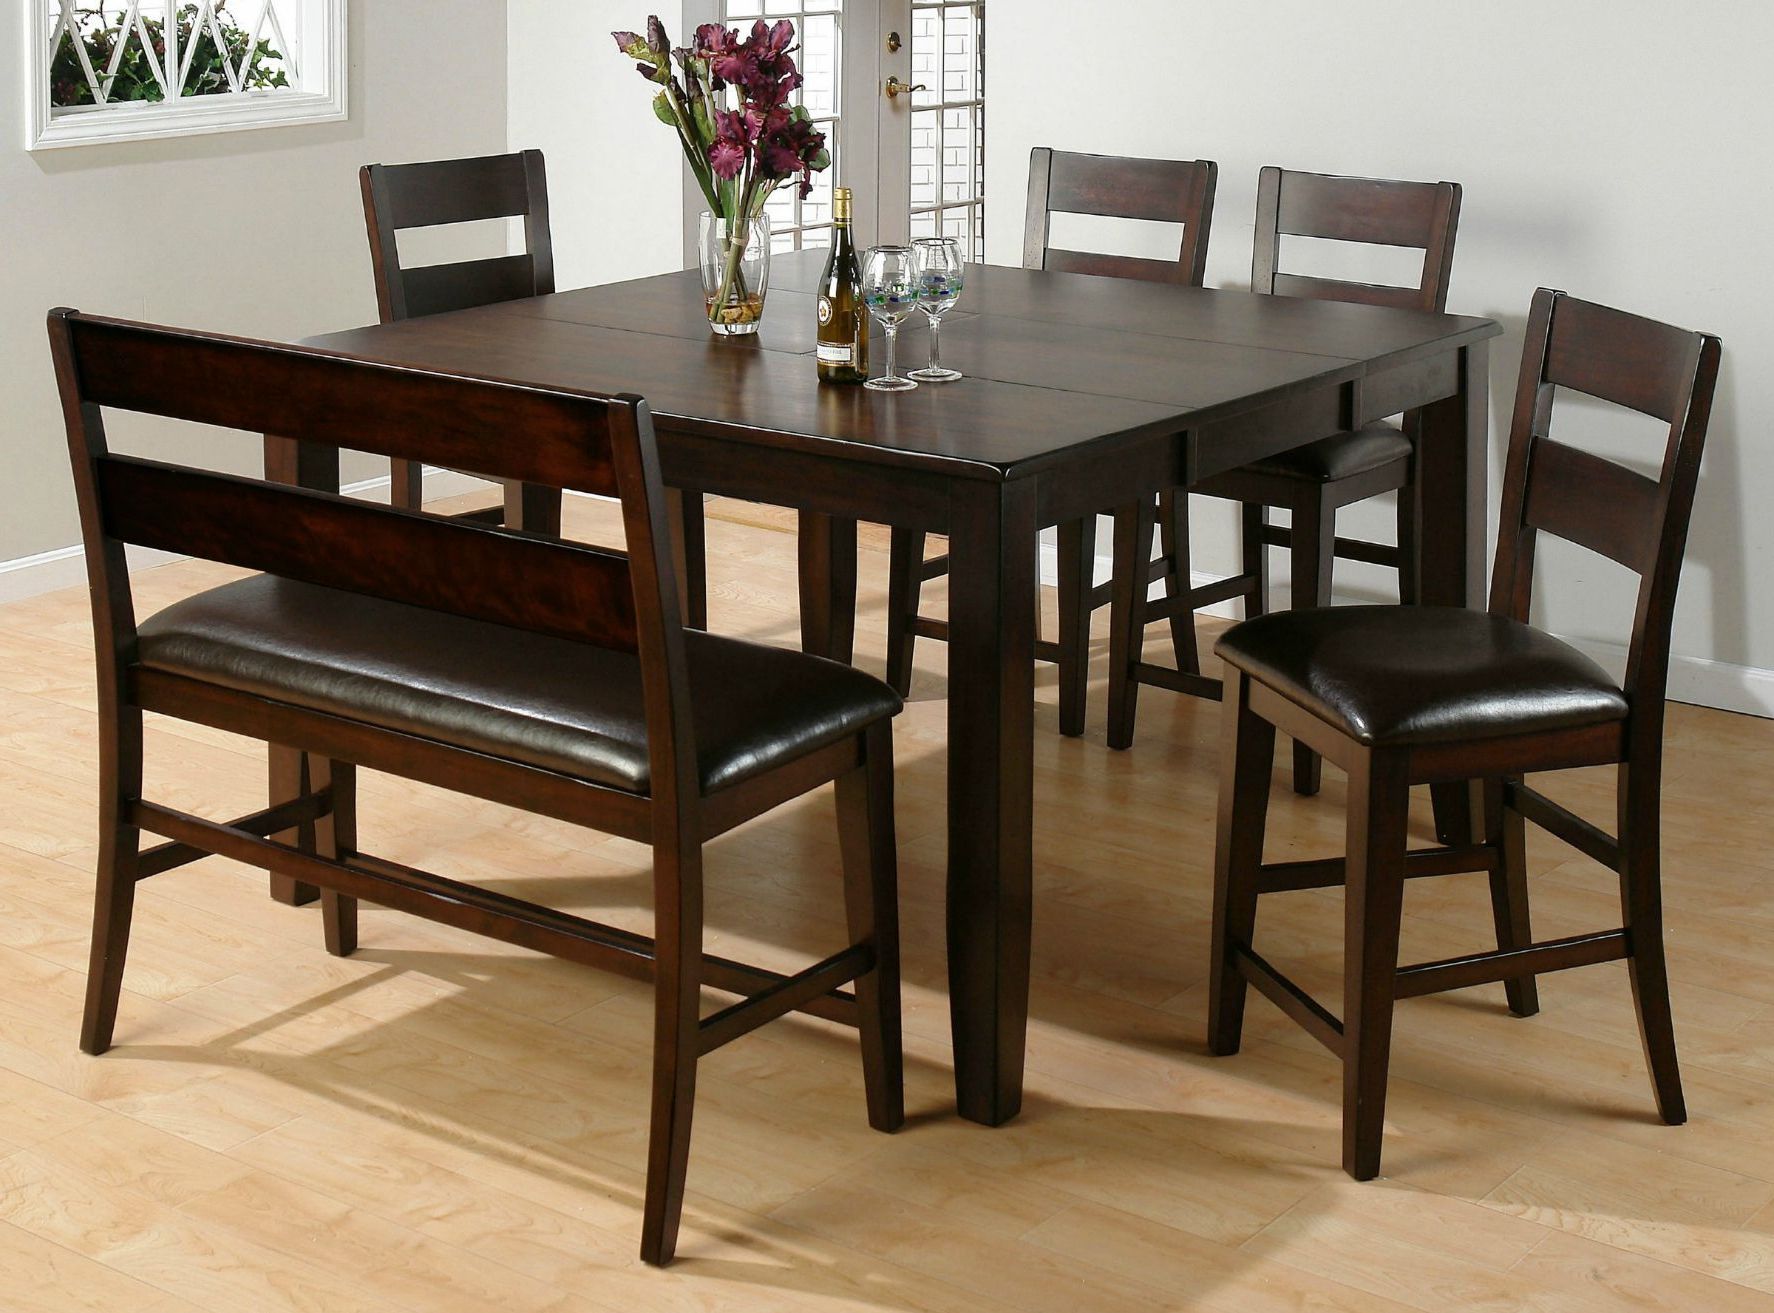 26 Dining Room Sets (big And Small) With Bench Seating (2020 With Most Popular Transitional 4 Seating Double Drop Leaf Casual Dining Tables (View 3 of 30)